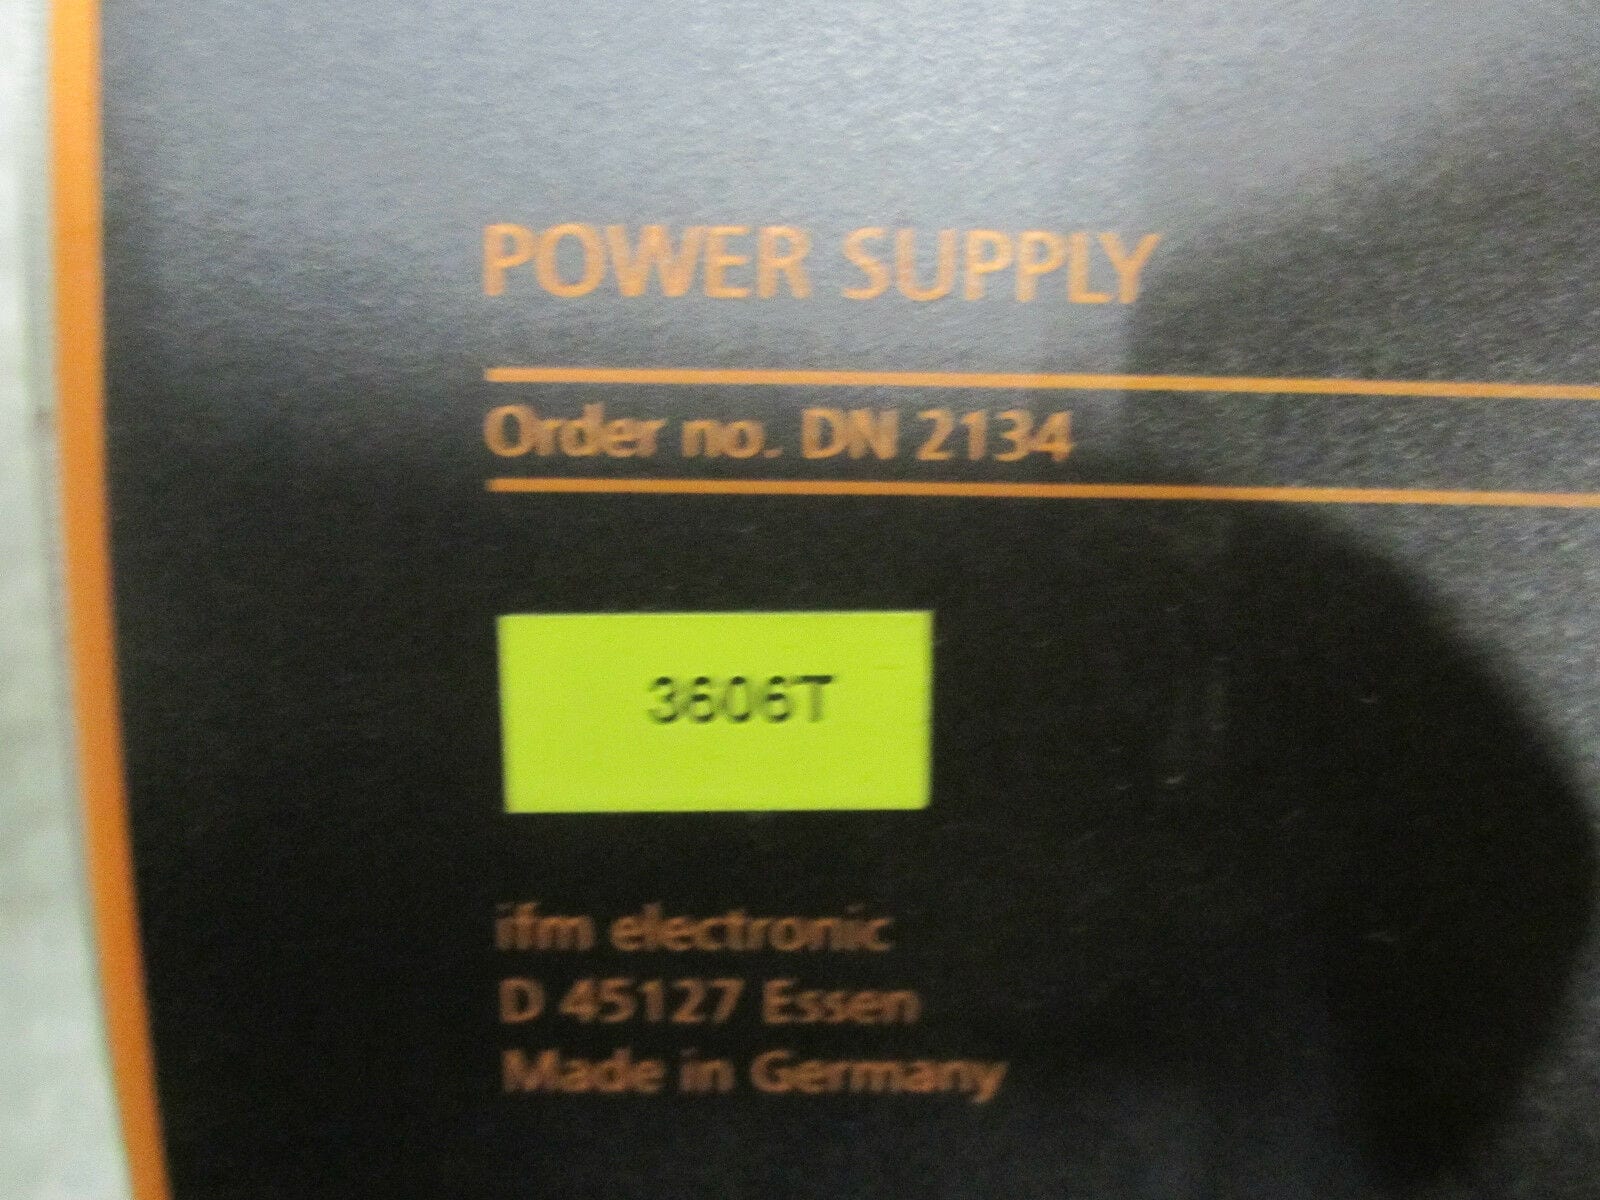 Good Condition Worldwide Ship Invoice Details about   IFM DN 2134 3-Phasen 24VDC 20A Supply 